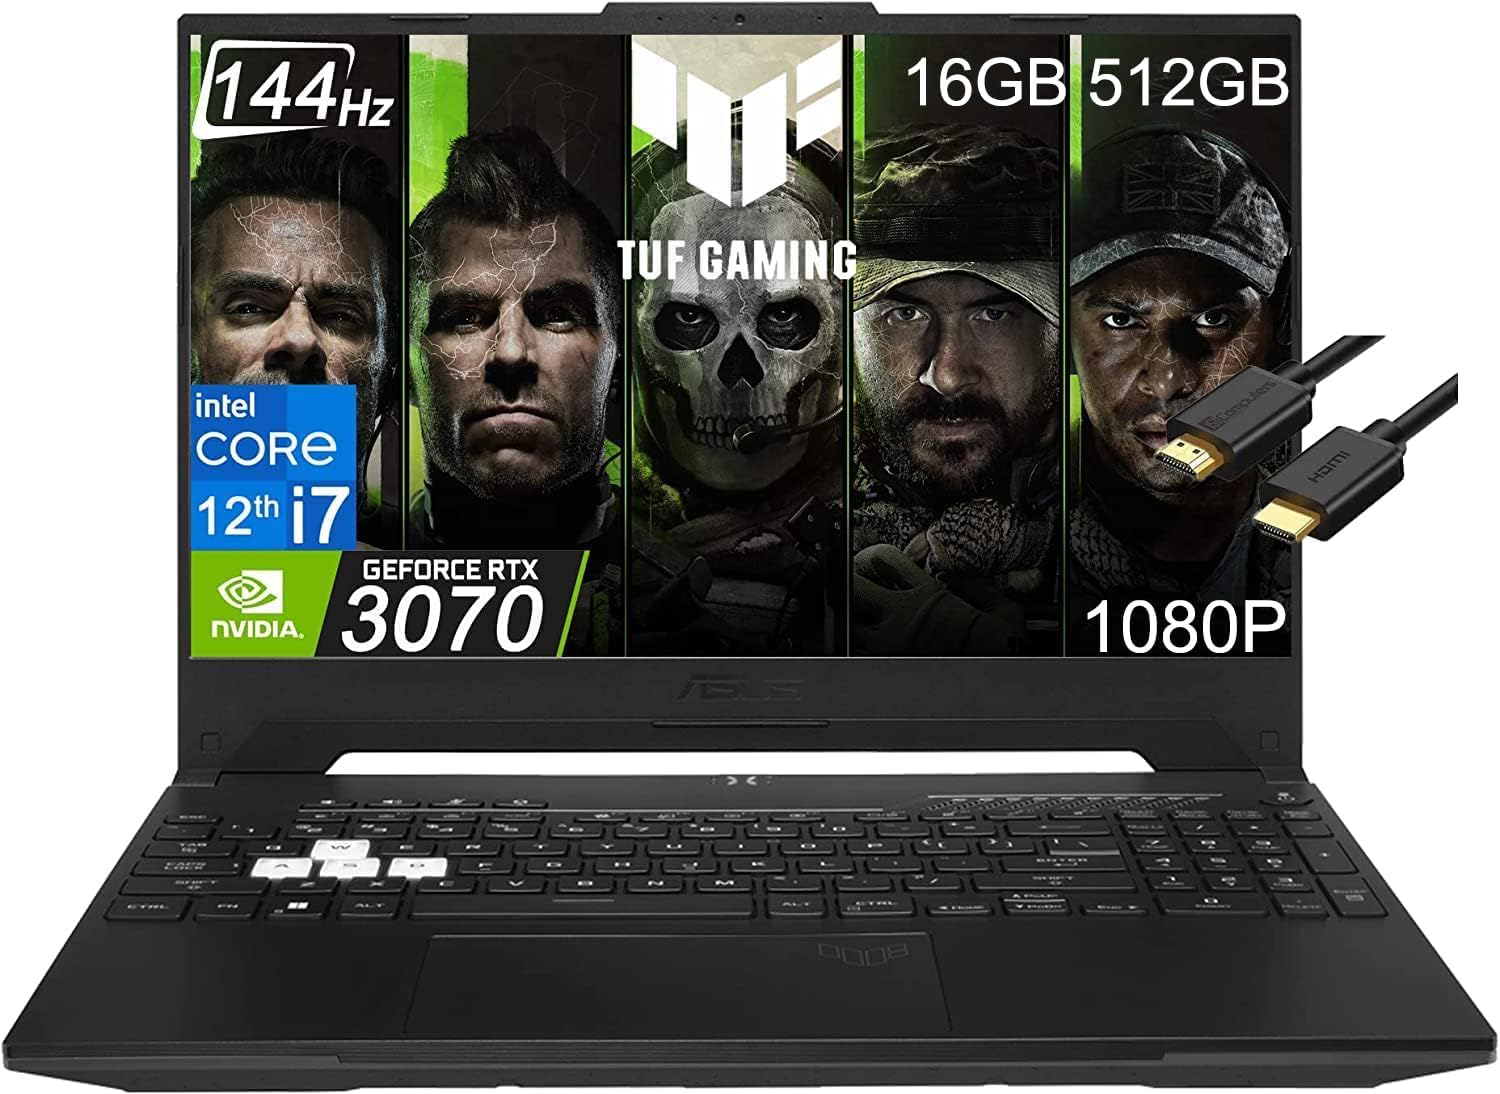 ASUS TUF Dash F15 Gaming Laptop (15.6 inches 144Hz, Intel 12th Gen i7-12650H, 16GB DDR5 RAM, 512GB PCle SSD, Geforce RTX 3070 8GB), Thunderbolt 4, Backlit KB, WiFi 6, IST Cable, Win 11 Home - Black 1